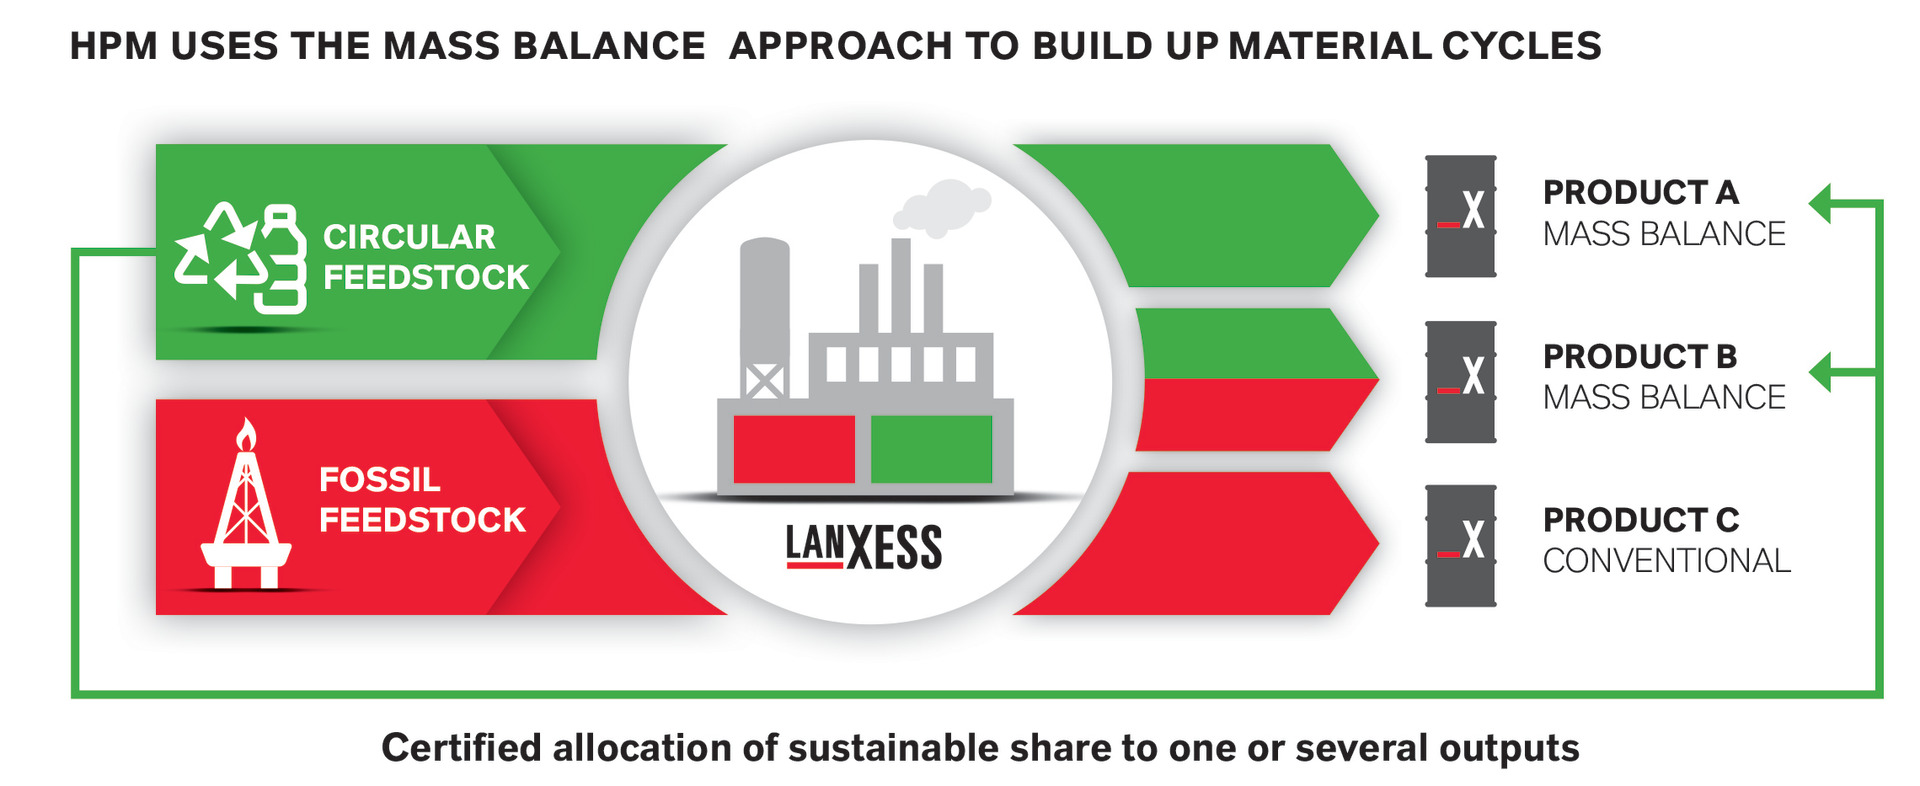 HPM APPLIES THE MASS BALANCE APPROACH
FOR THE ESTABLISHMENT OF MATERIAL CYCLES